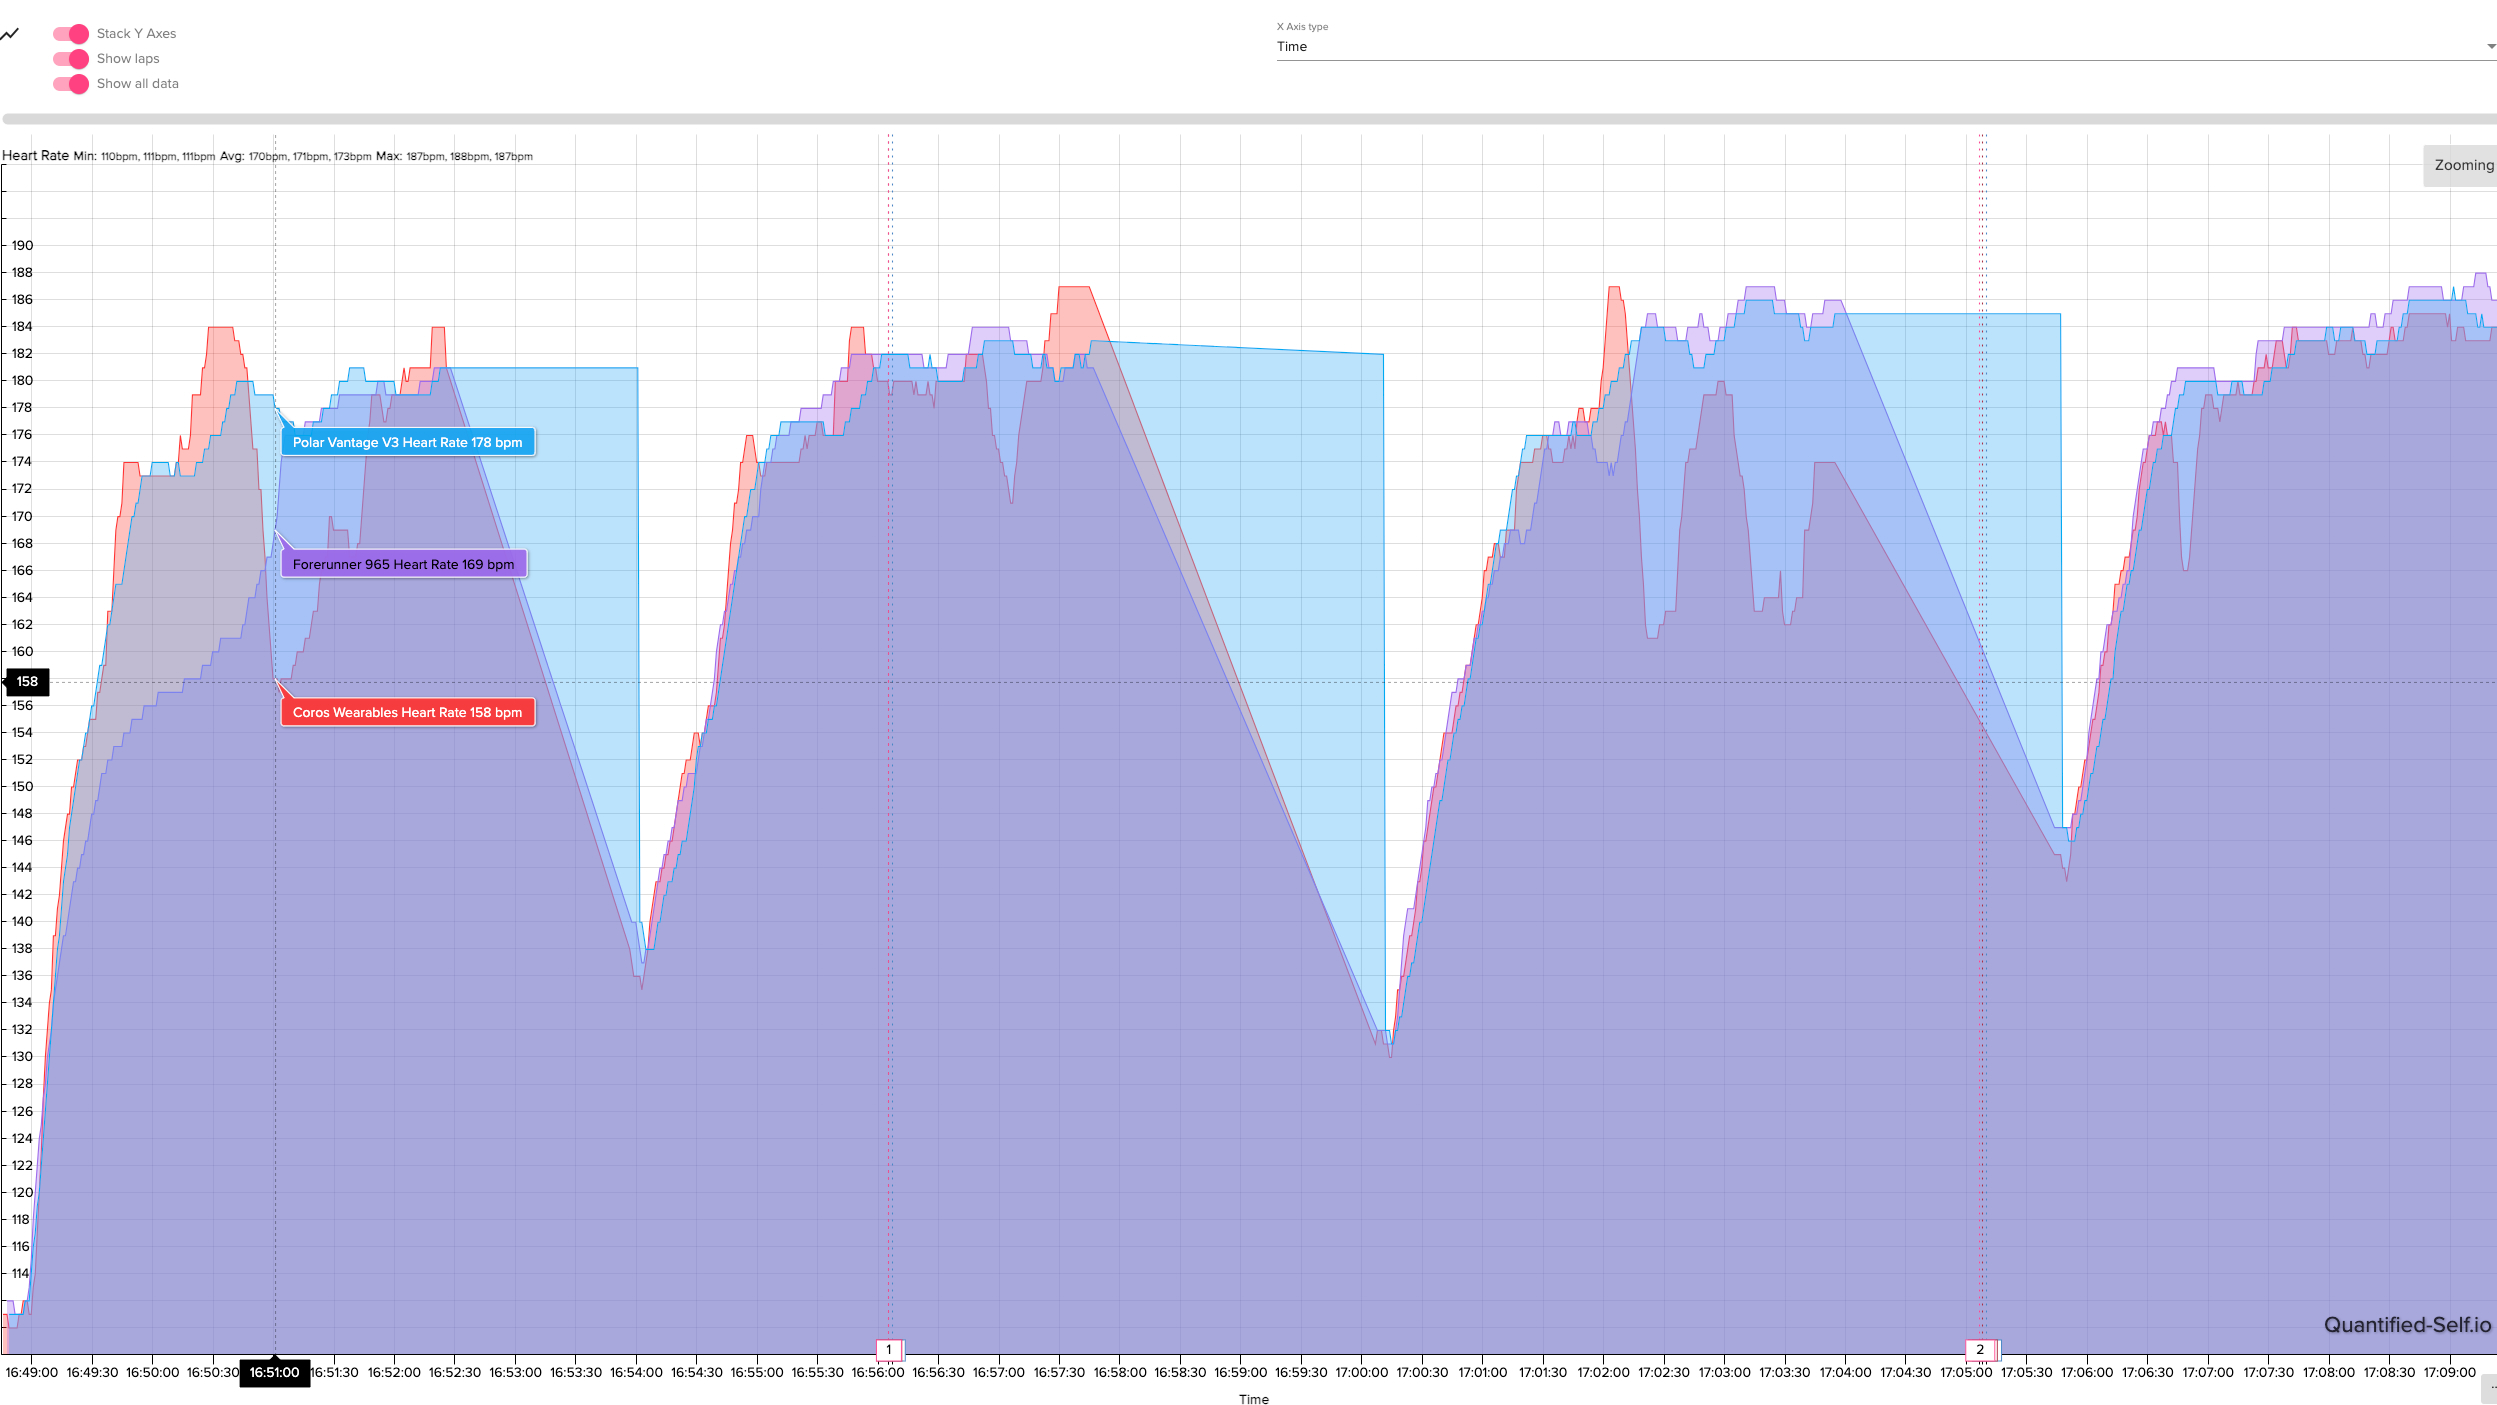 A HR chart showing the results for the COROS VERTIX 2S, Garmin Forerunner 965, Polar Vantage V3, and Polar H10 chest strap.